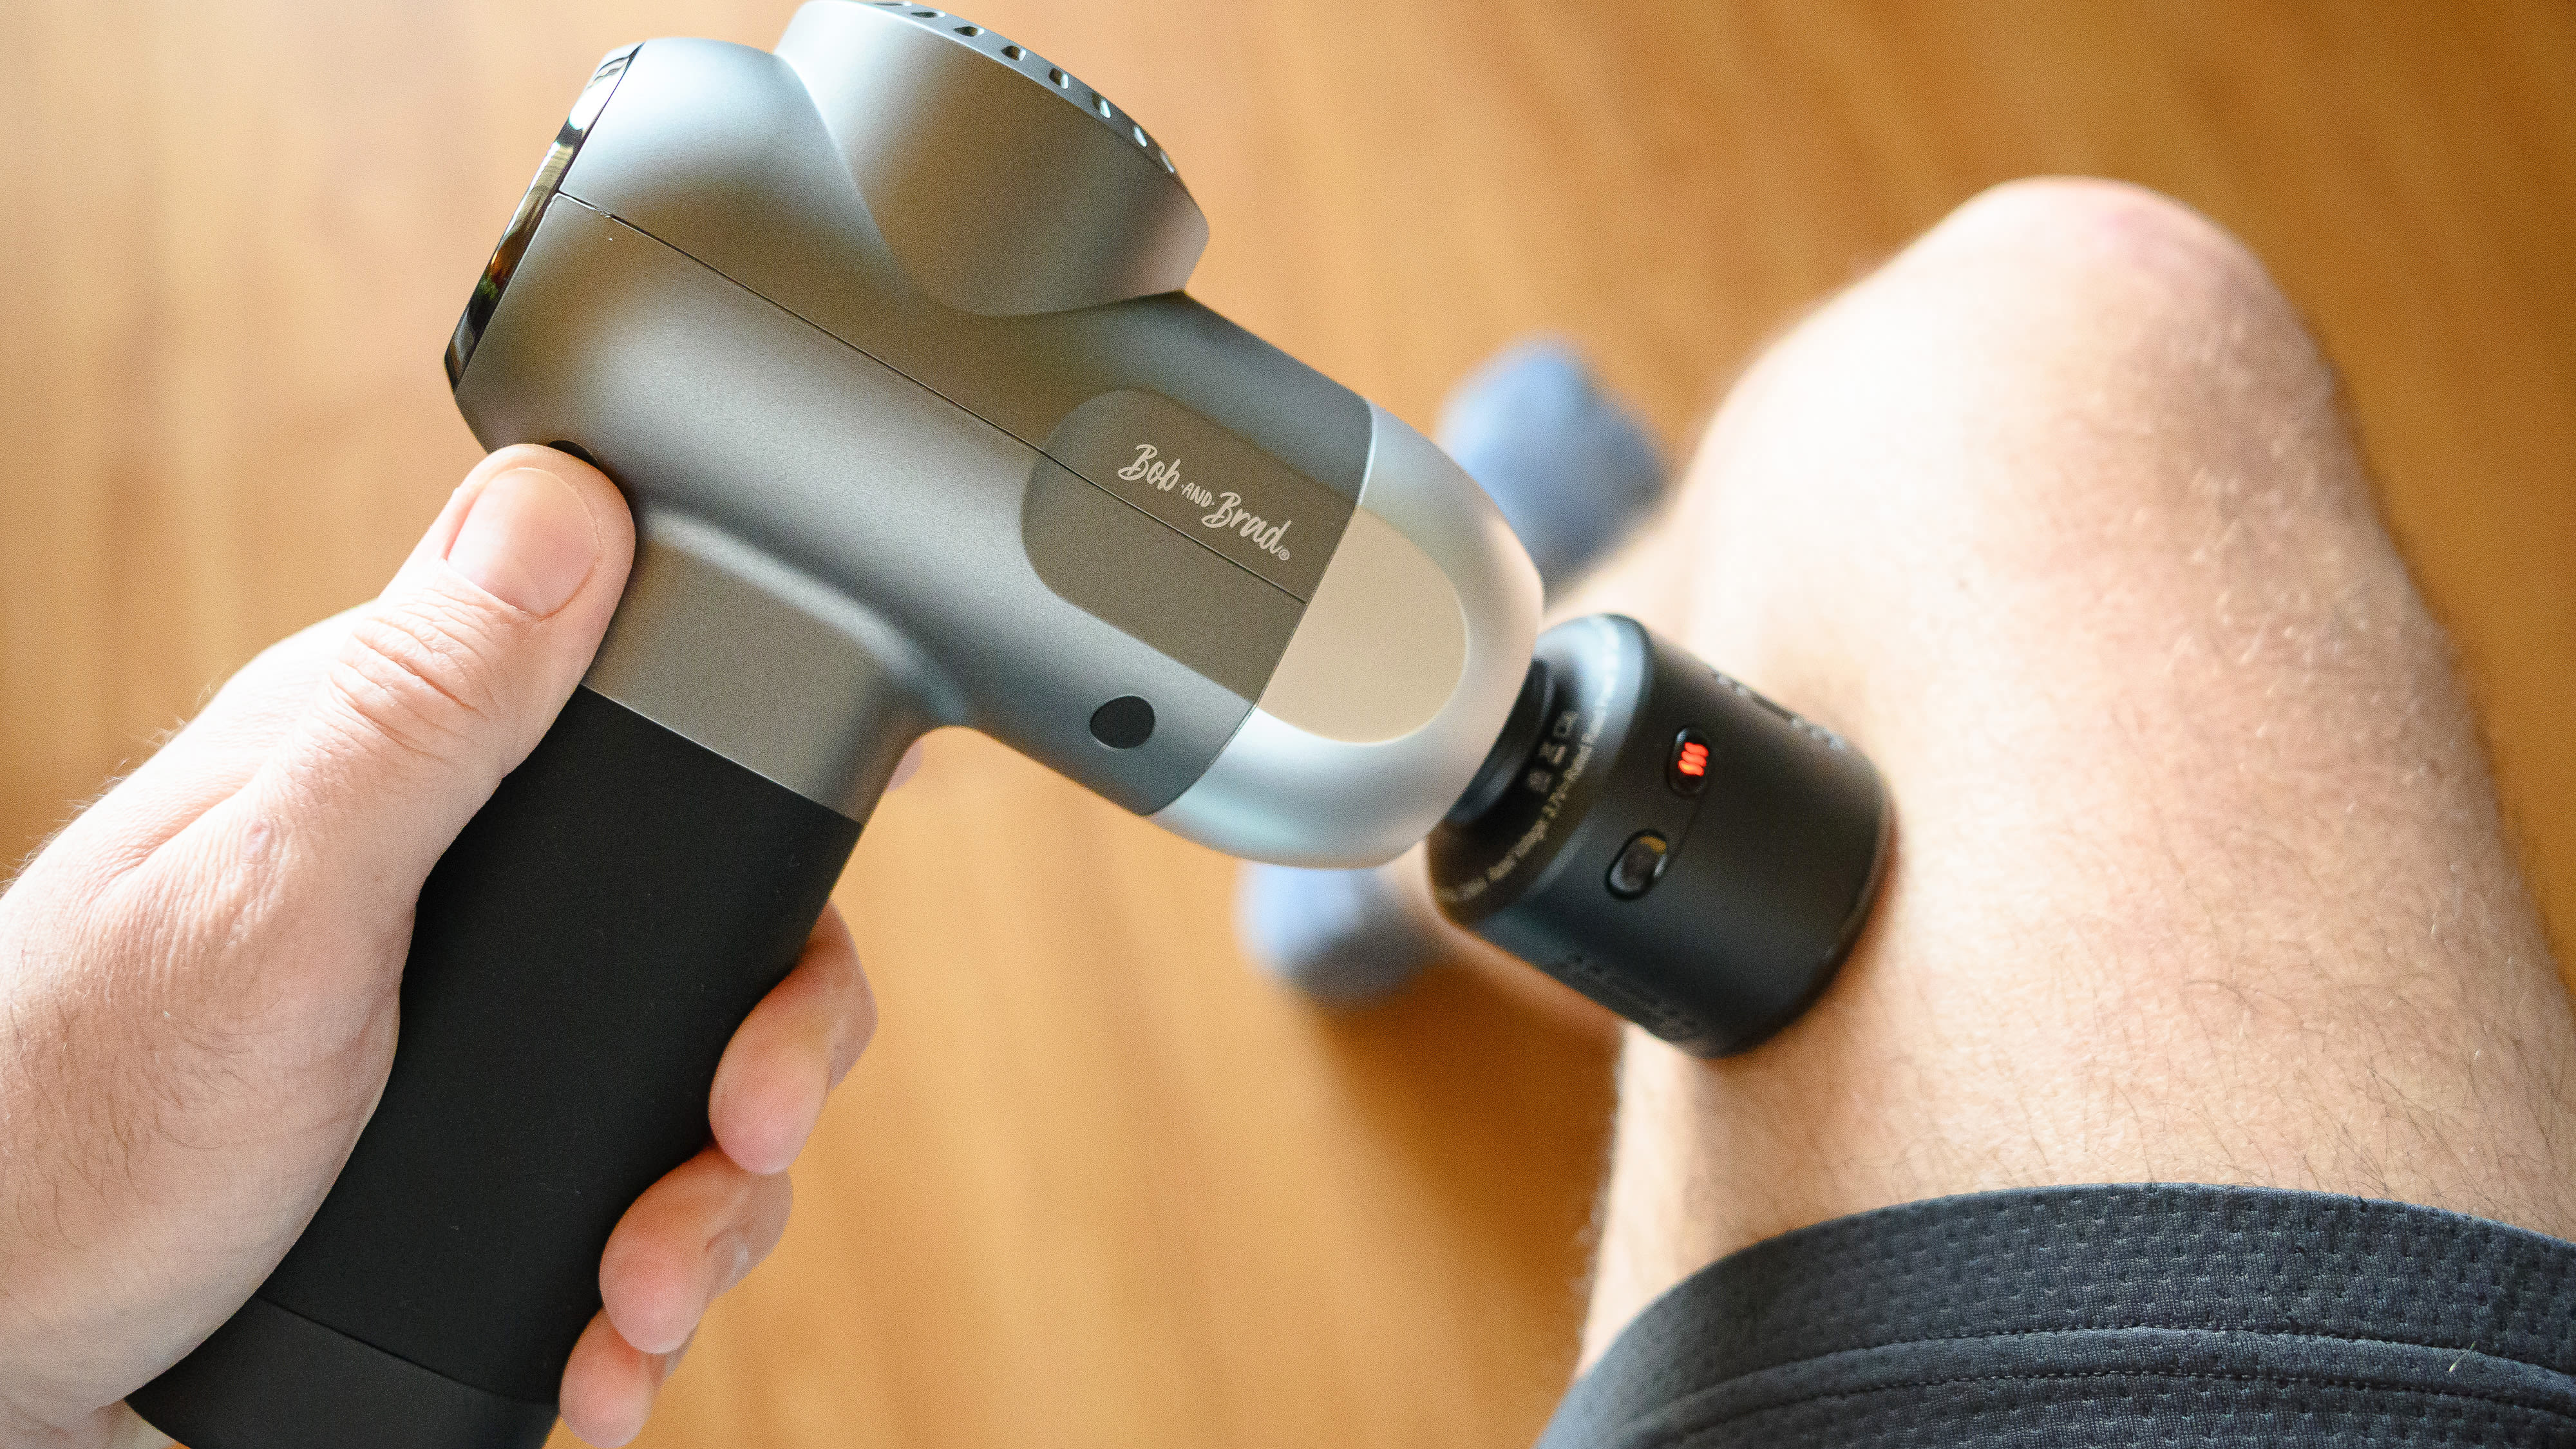 I tried a $100 ‘heat and ice’ massage gun on my sore muscles – 5 things that surprised me